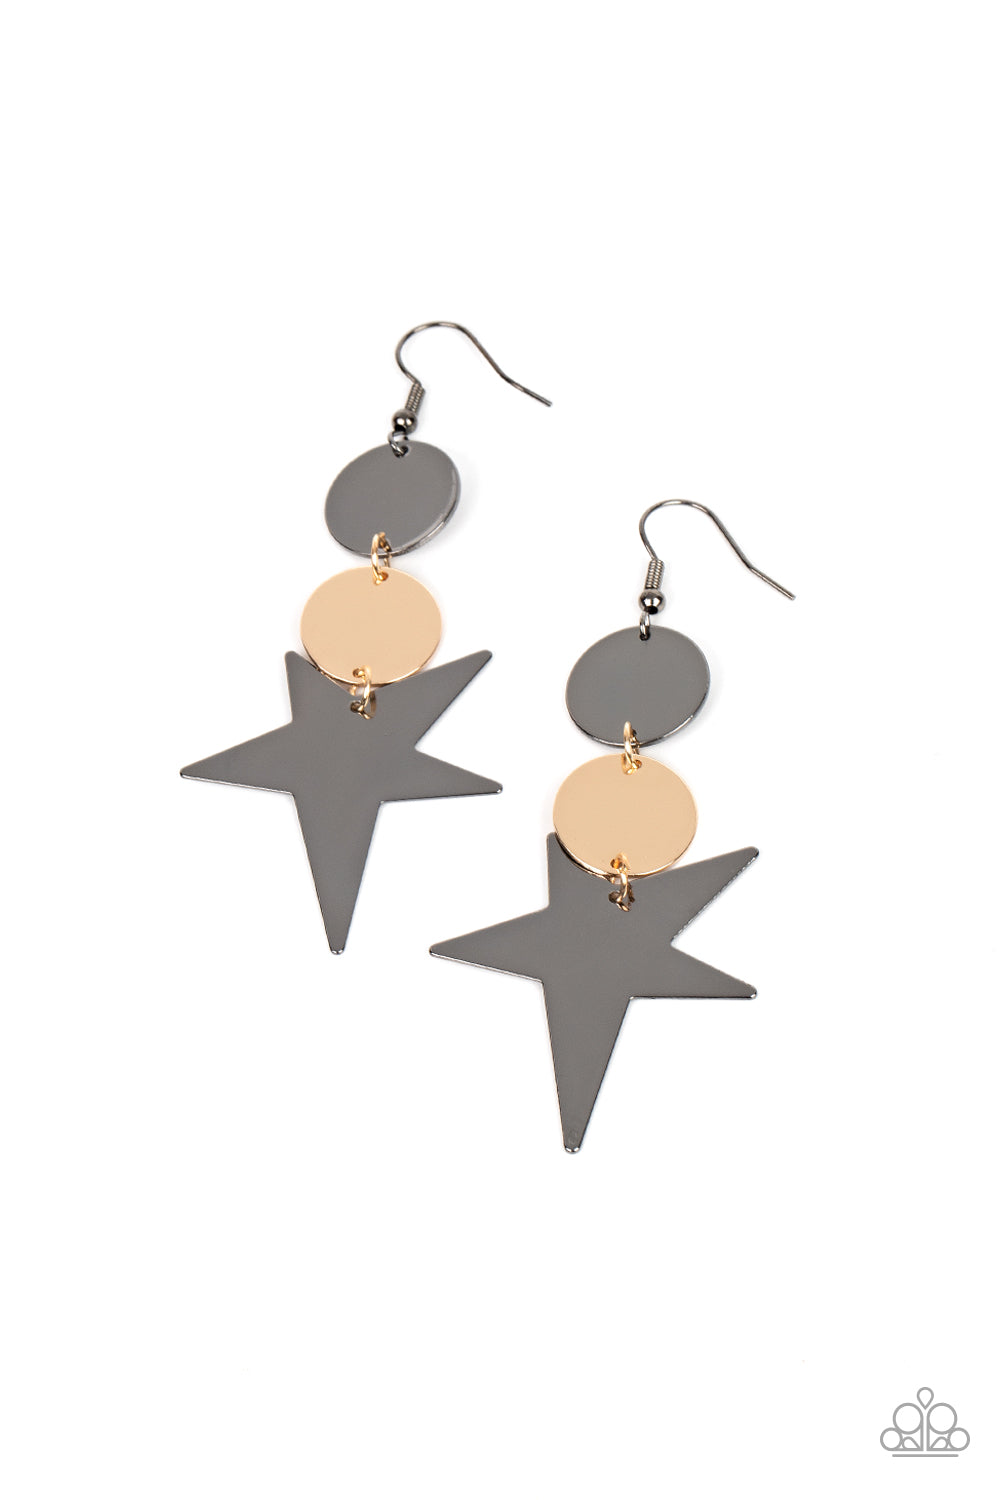 Star Bizarre - Multi - Black Gunmetal and Gold - Star Earrings - Paparazzi Accessories - An asymmetrical gunmetal star radiates from two linked flat gold and gunmetal discs, resulting in a stellar lure. Earring attaches to a standard fishhook fitting. Trendy fashion jewelry for everyone.